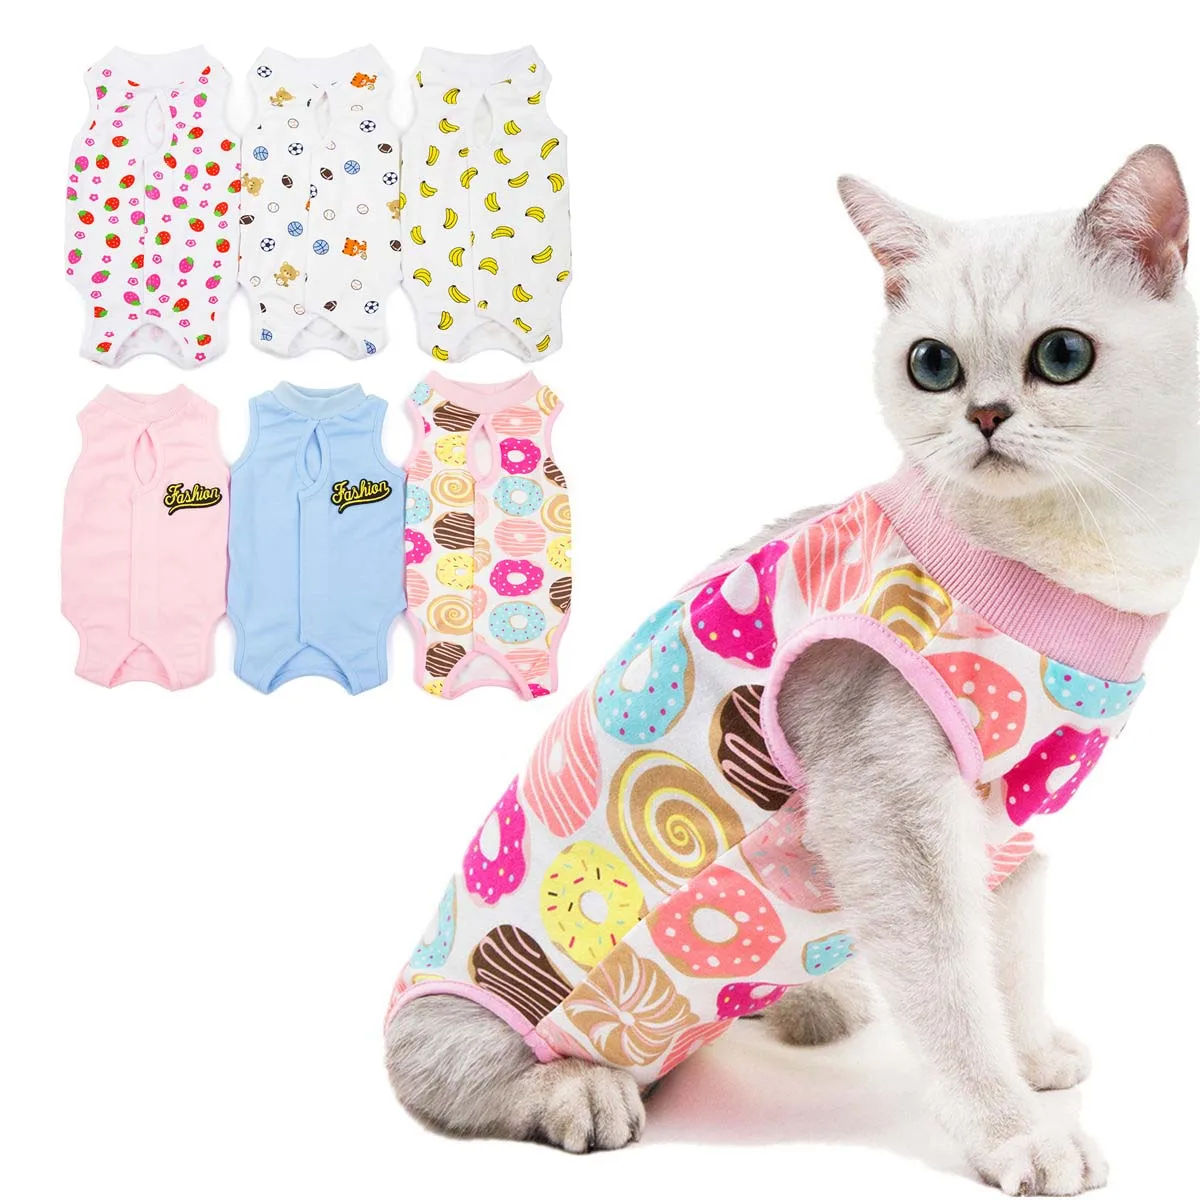 Cotton Cat Clothes Recovery Suit Cotton Cat Weaning Bodysuit After Surgery Wear Anti Licking Wounds for Small Dogs Female Cat breathable anti bite anti licking cat accessories protective space hood grooming mask cat muzzle bath grooming for small cat